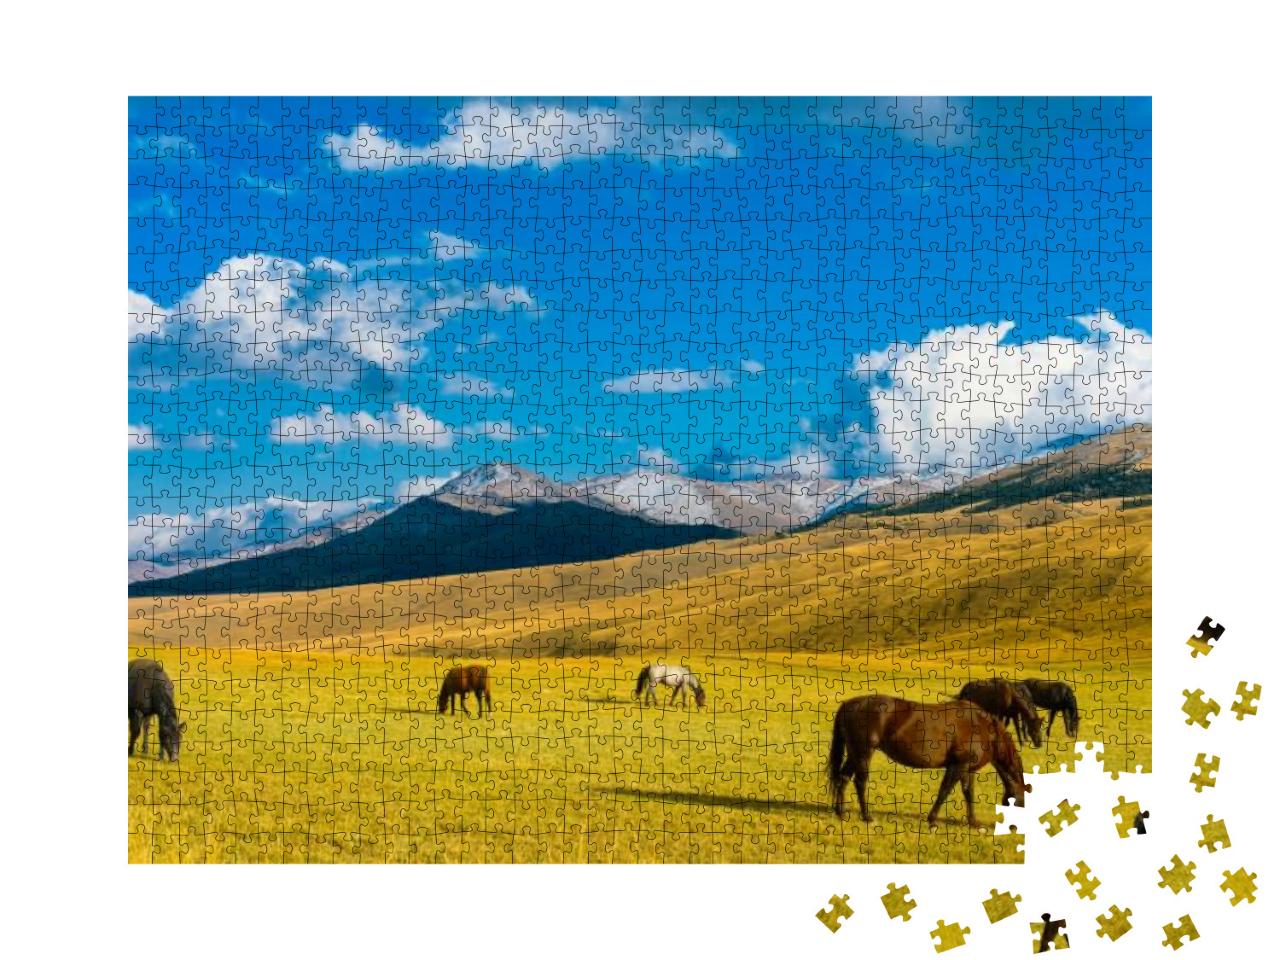 Lonely Horses in Kazakhstan Steppe, Near Almaty City... Jigsaw Puzzle with 1000 pieces